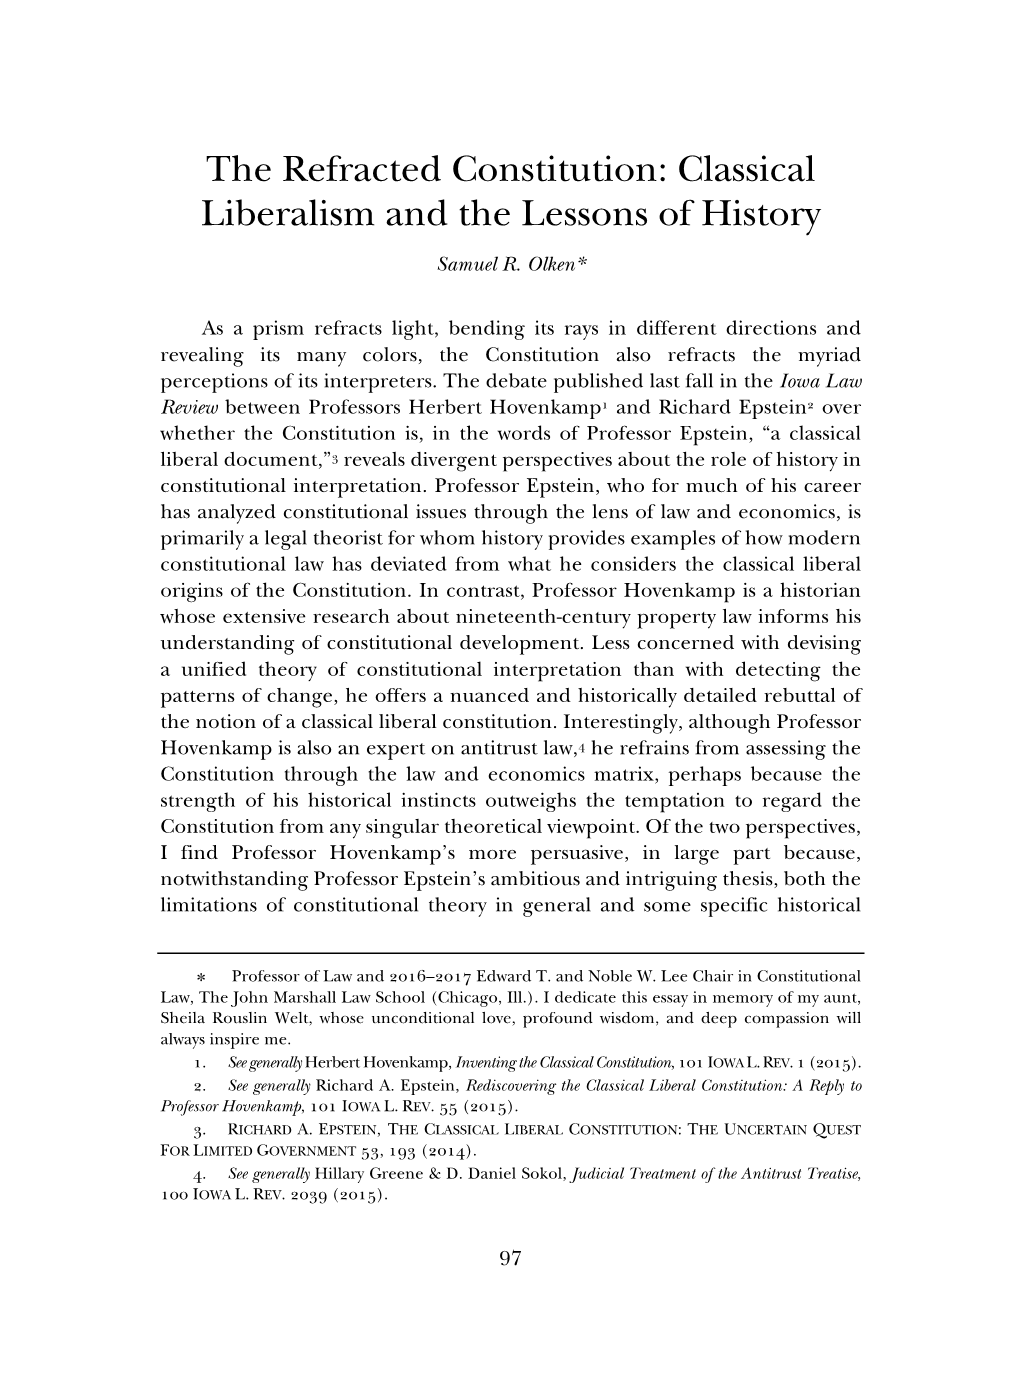 The Refracted Constitution: Classical Liberalism and the Lessons of History Samuel R